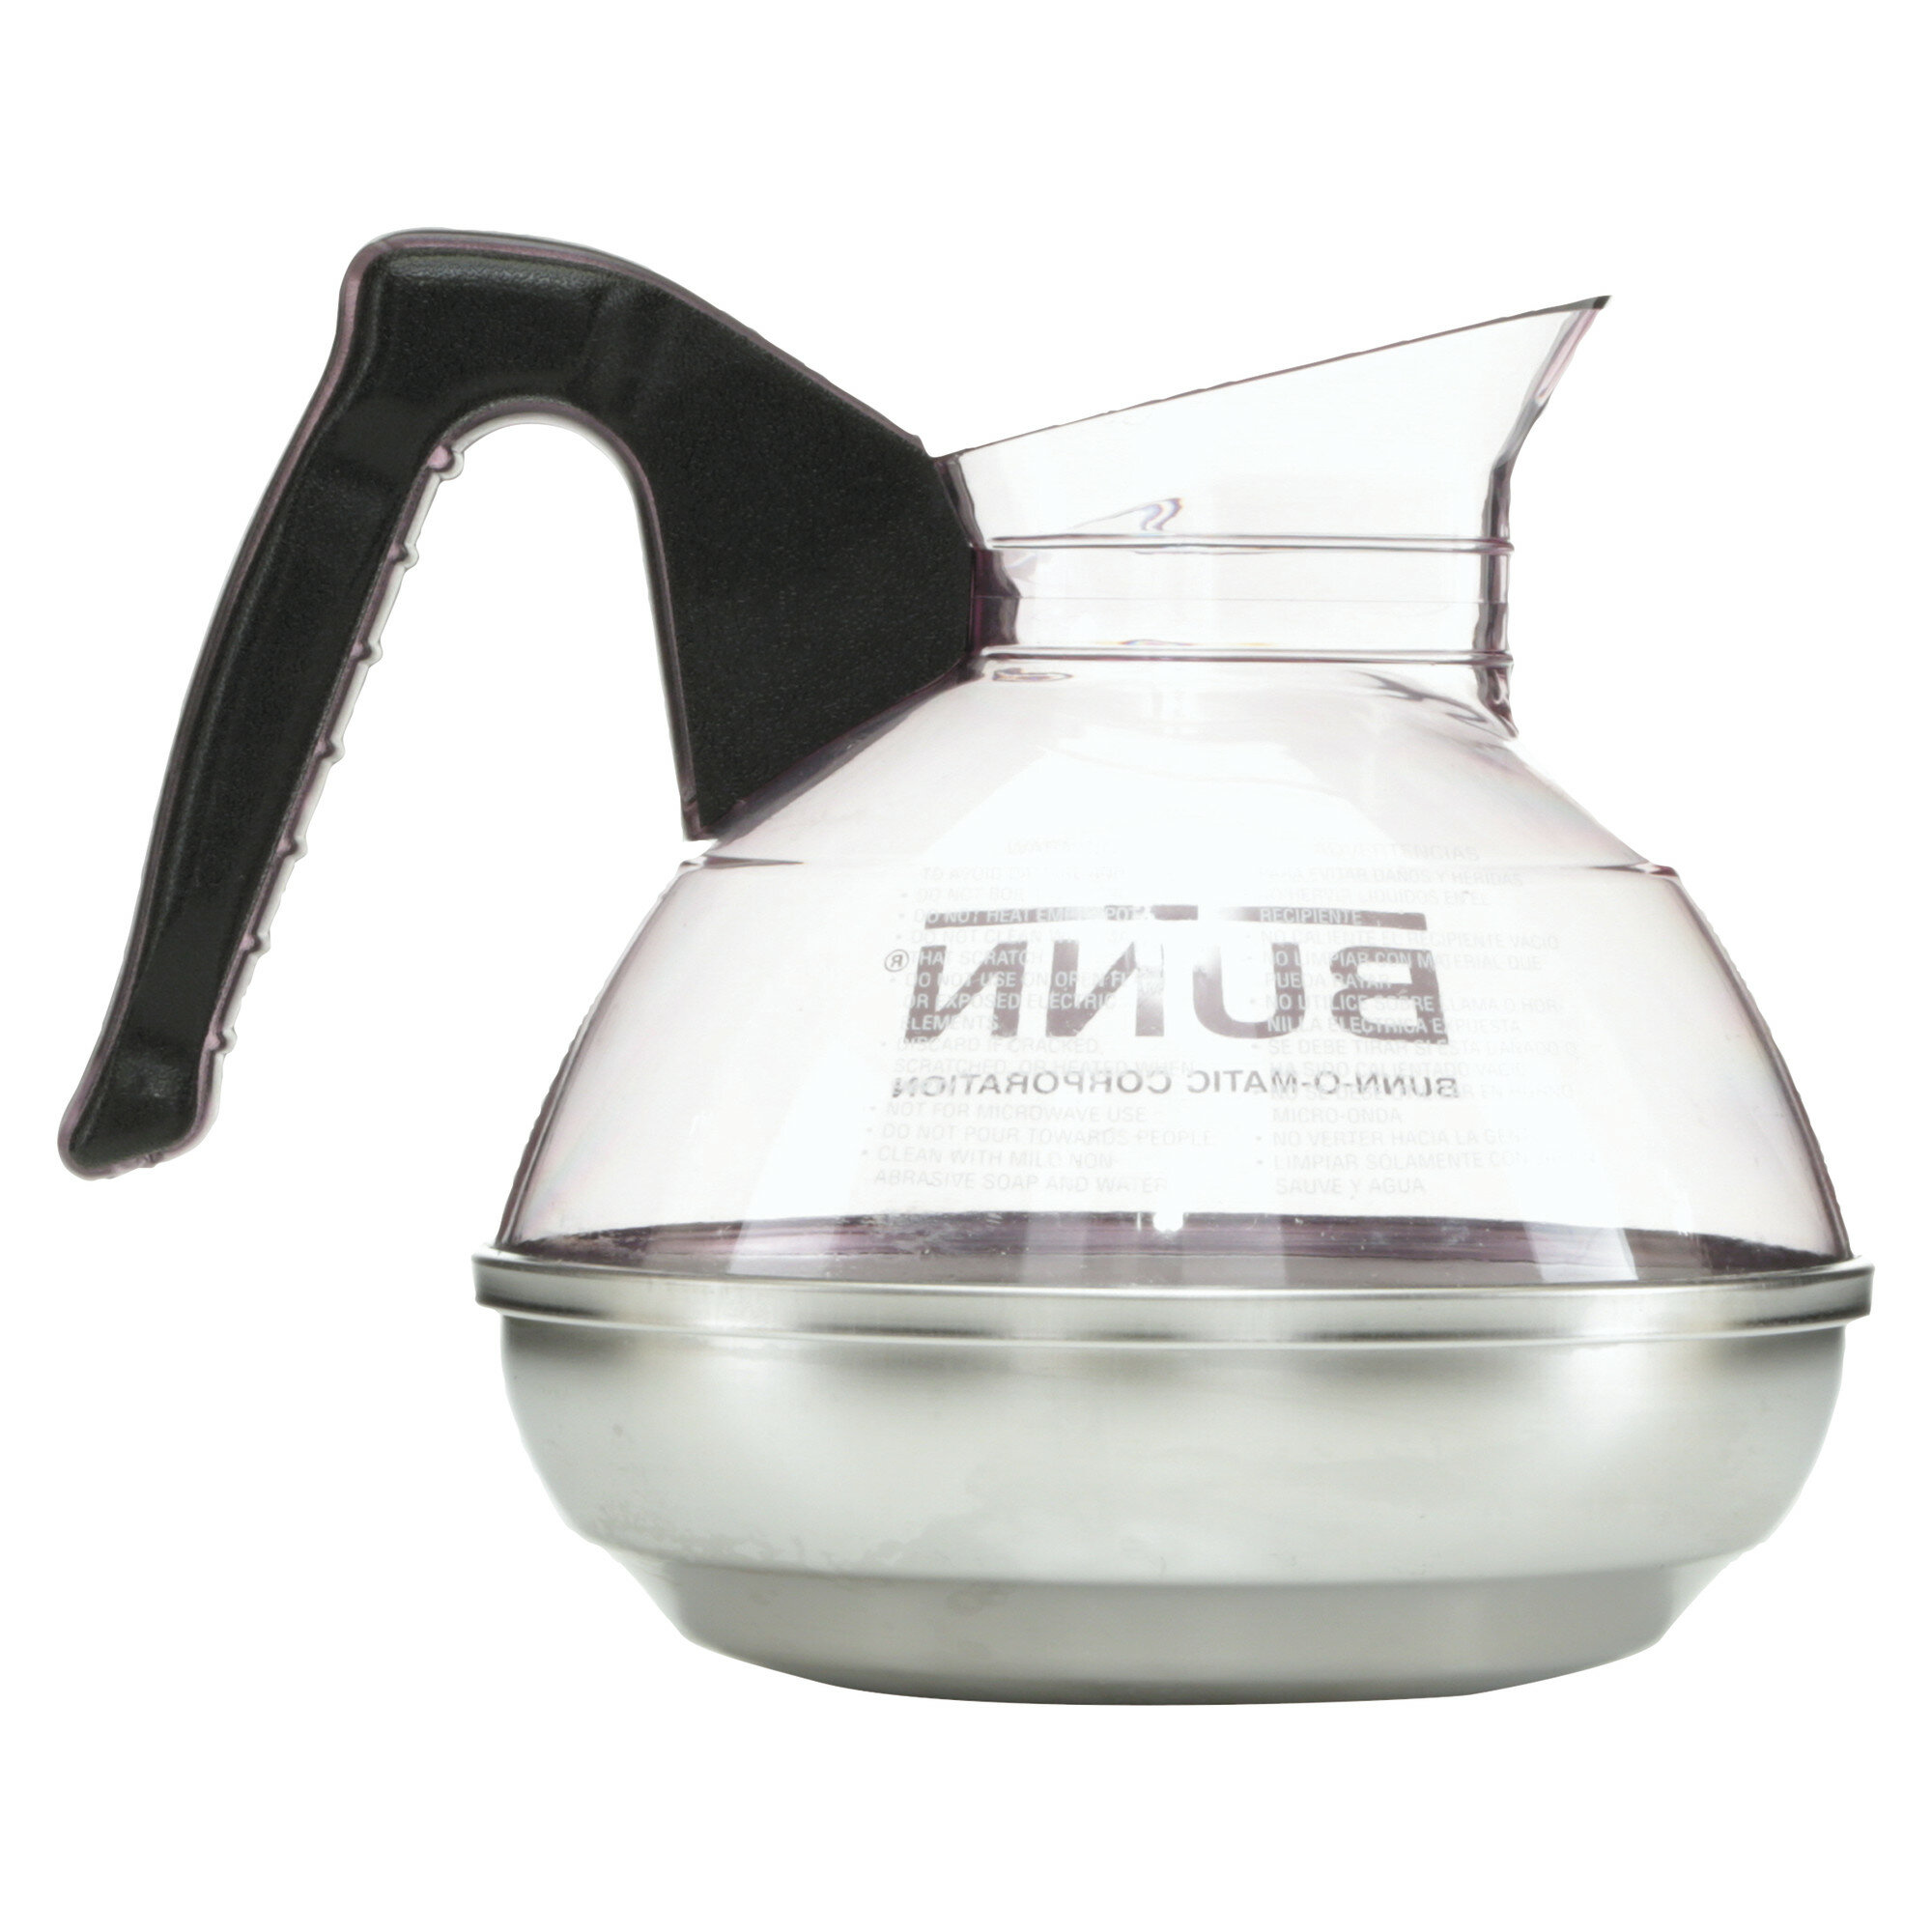 12-Cup Coffee Carafe For Pour-O-Matic Bunn Coffee Makers